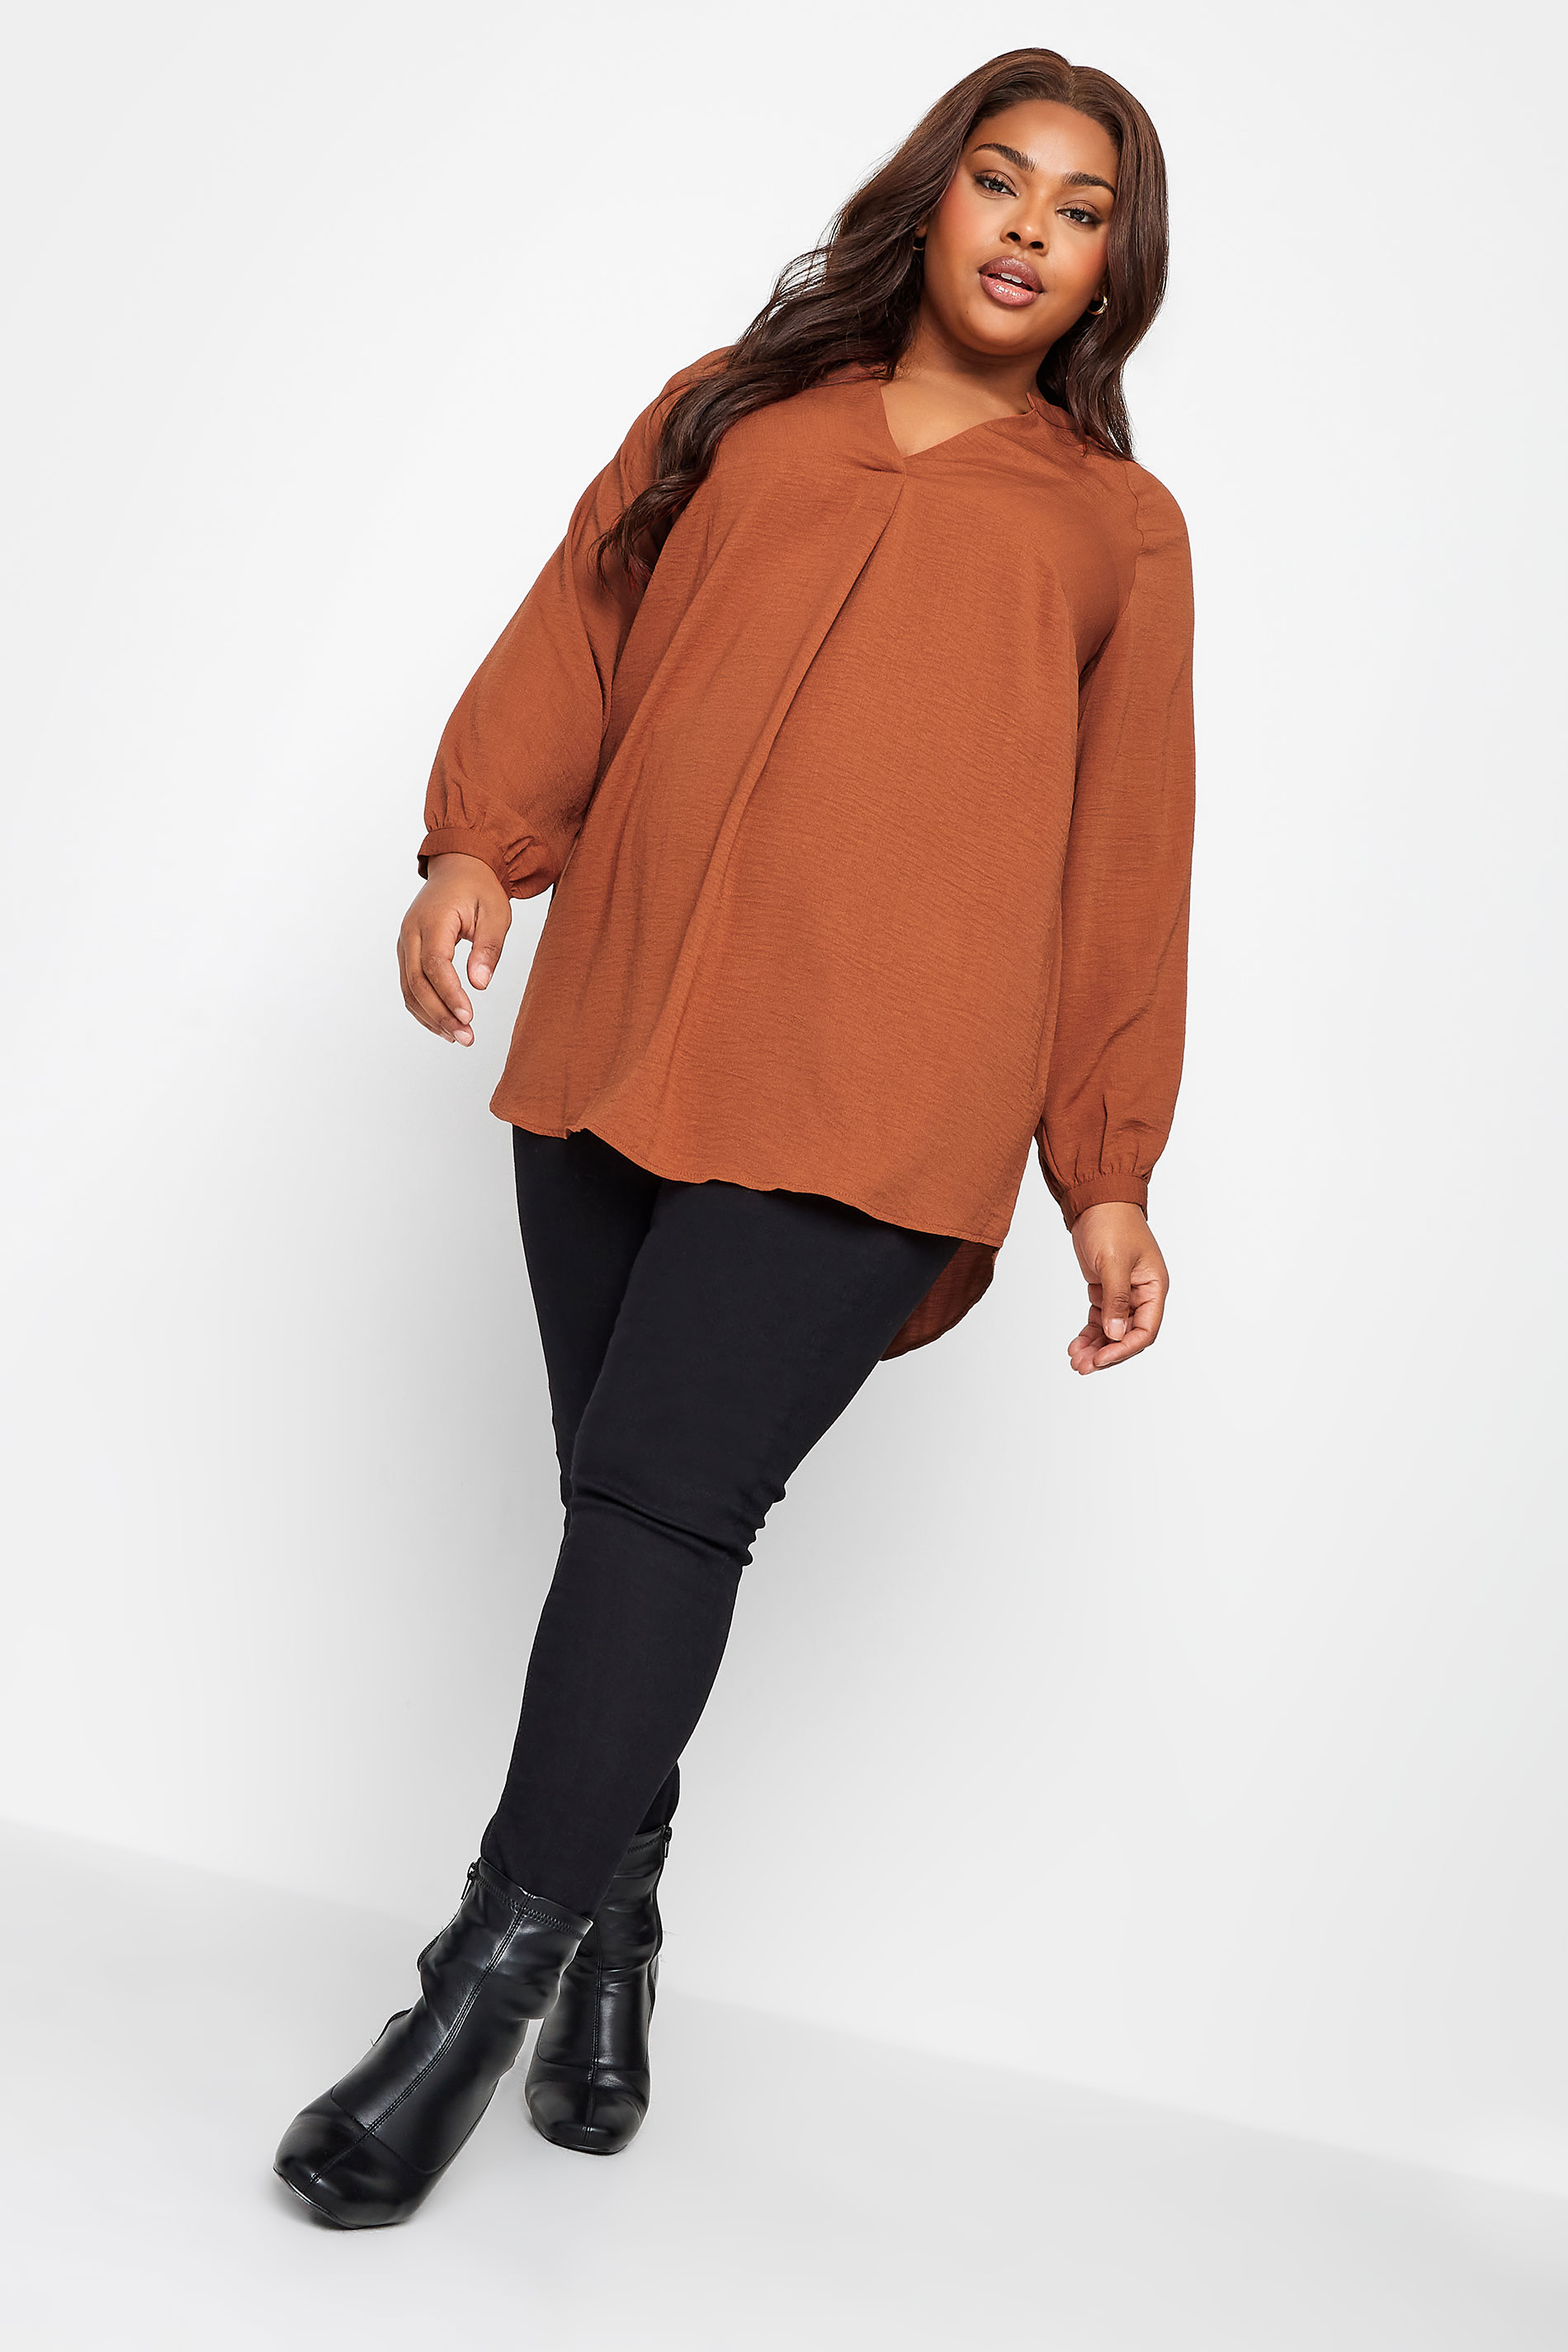 YOURS Curve Plus Size Rust Orange Textured Tunic Shirt | Yours Clothing  3